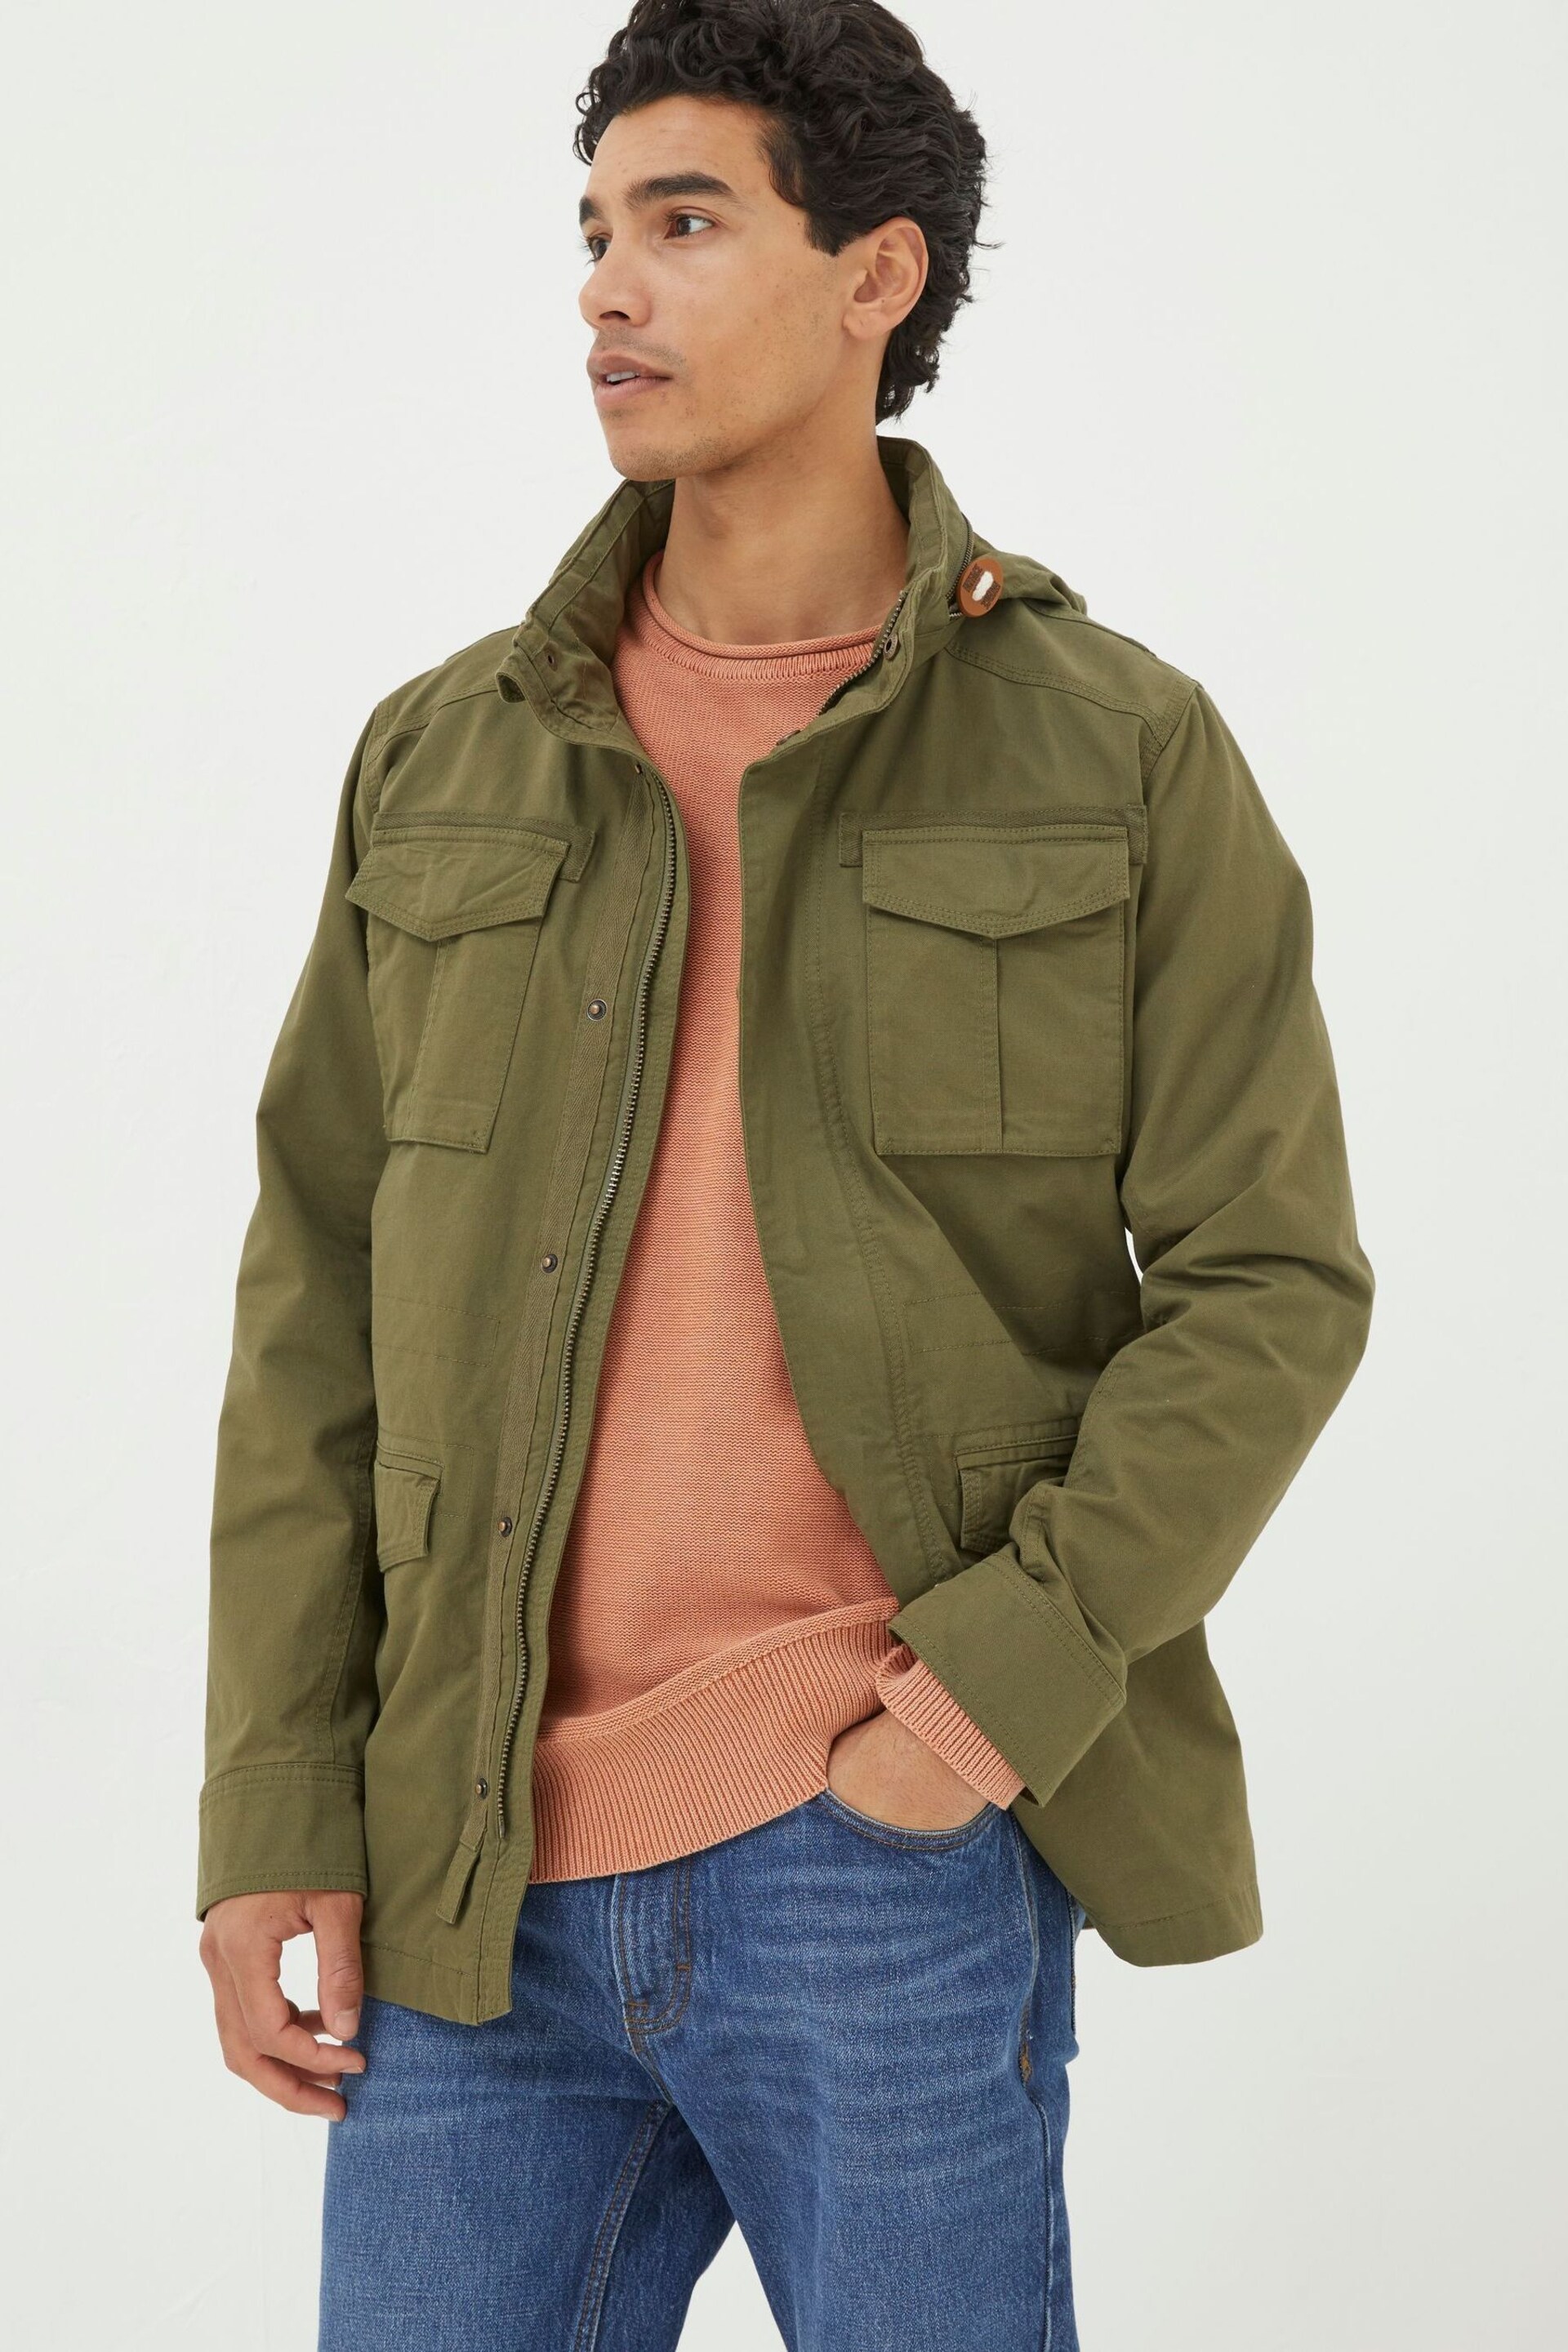 FatFace Green Cotton 4 Pocket Jacket - Image 1 of 5